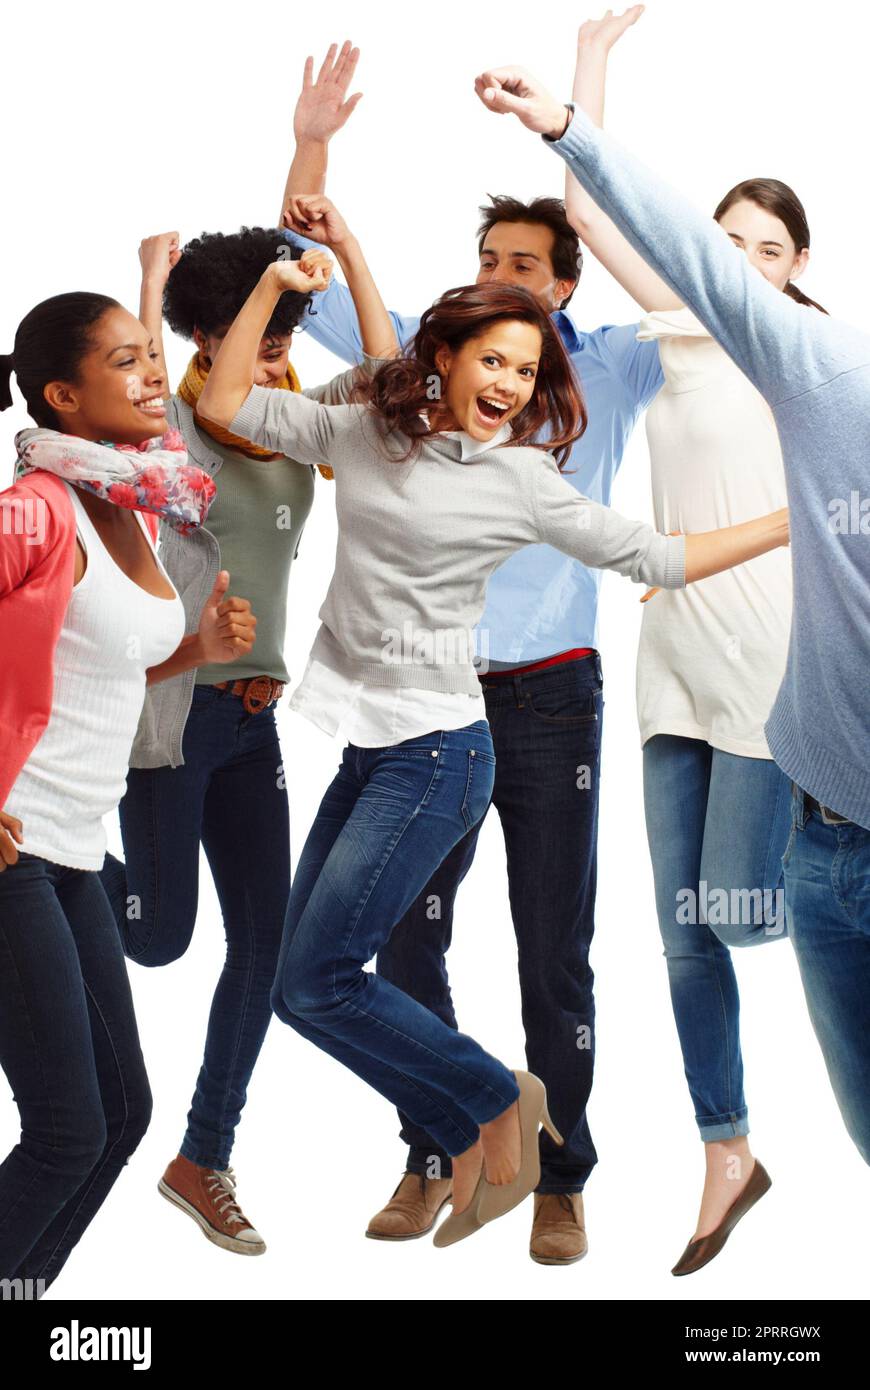 Jumping for joy. Group of casually dressed young adults jumping excitedly against a white background. Stock Photo